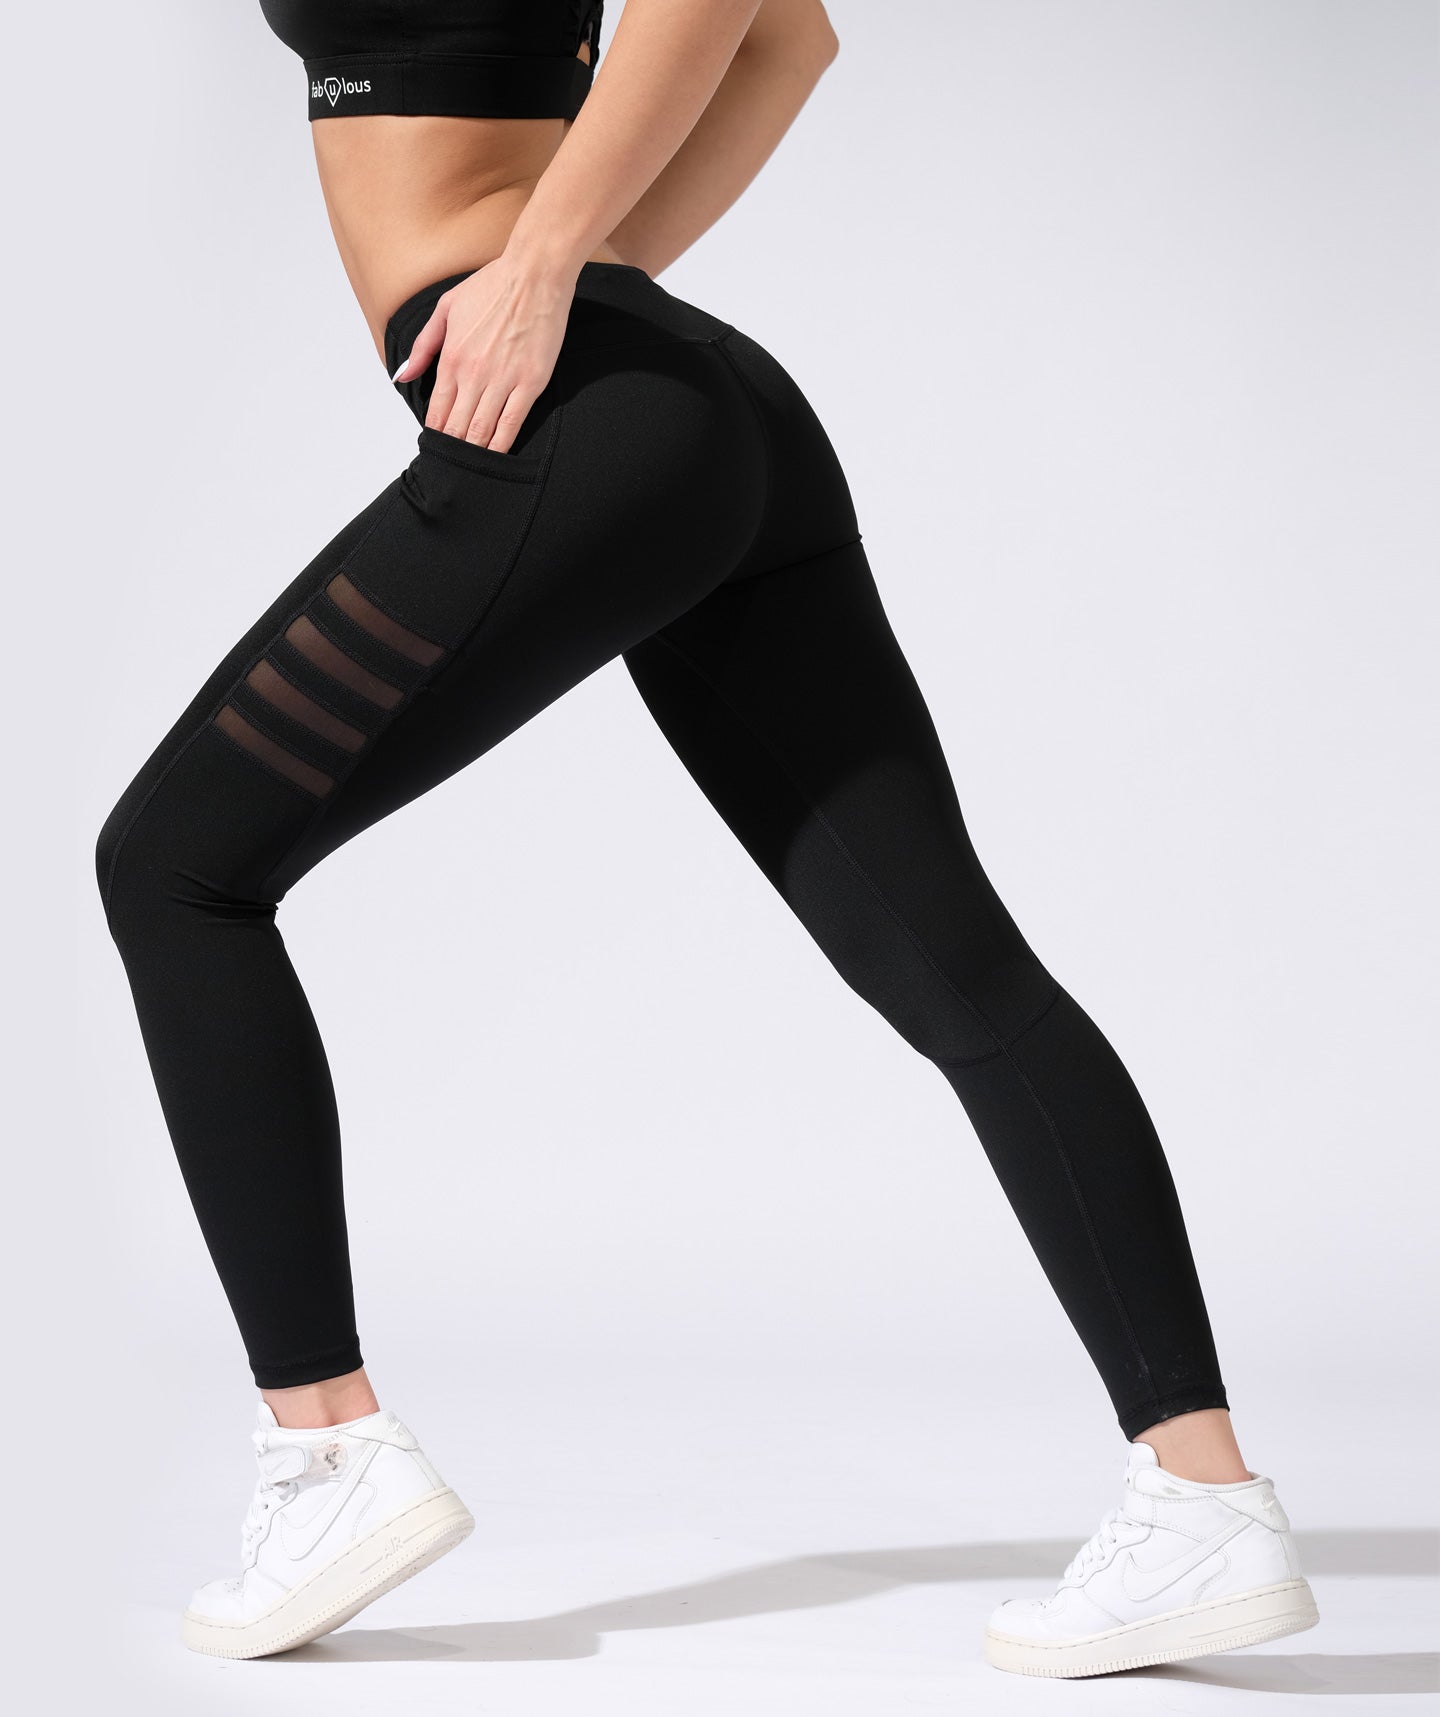 TechFit Leggings with Transparent Mesh and Side Pockets in Black